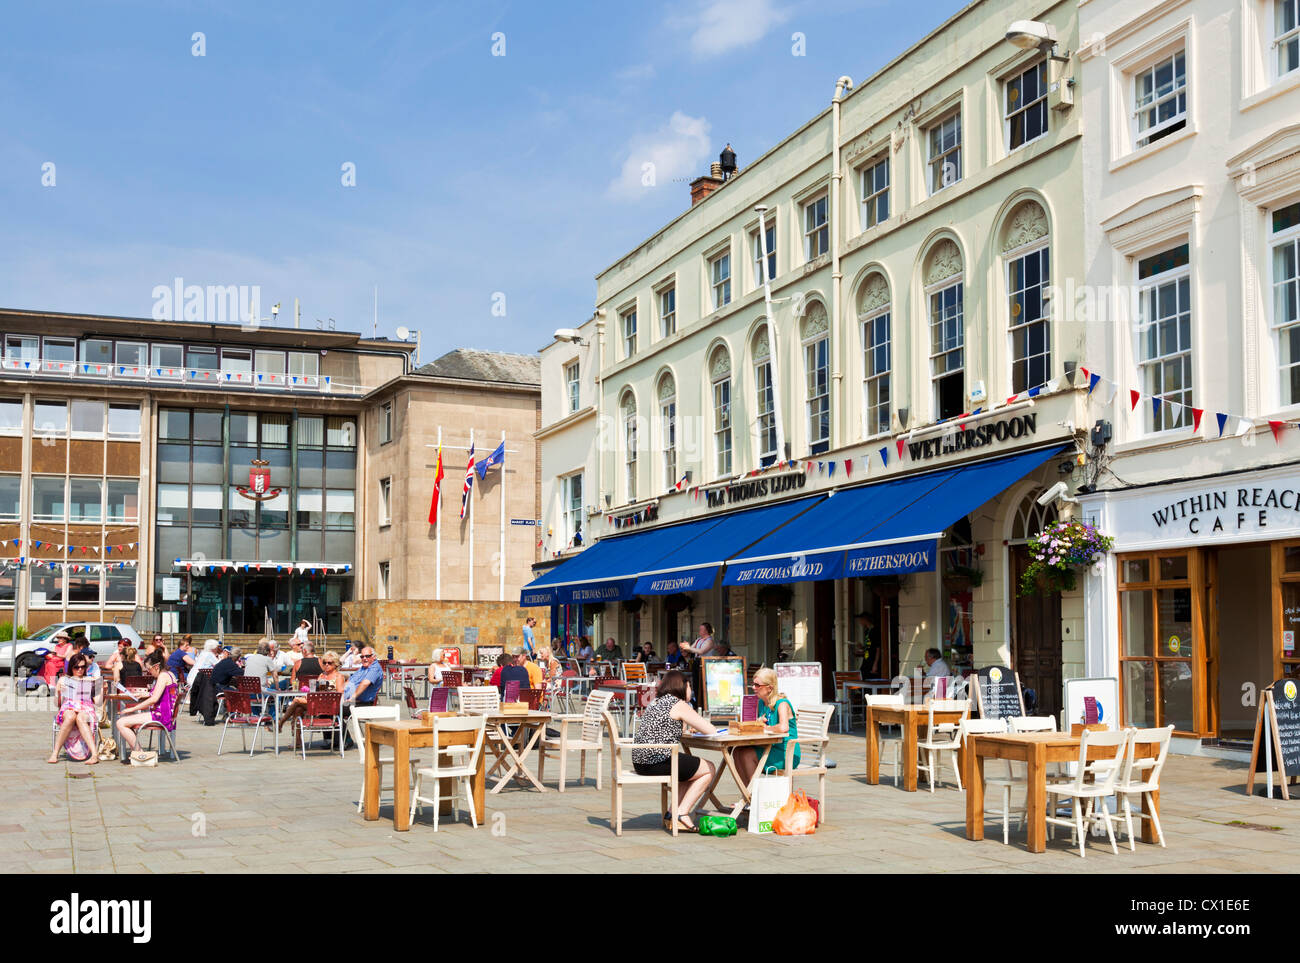 Cafes outside in Warwick town centre Warwichshire UK GB EU Europe Stock Photo